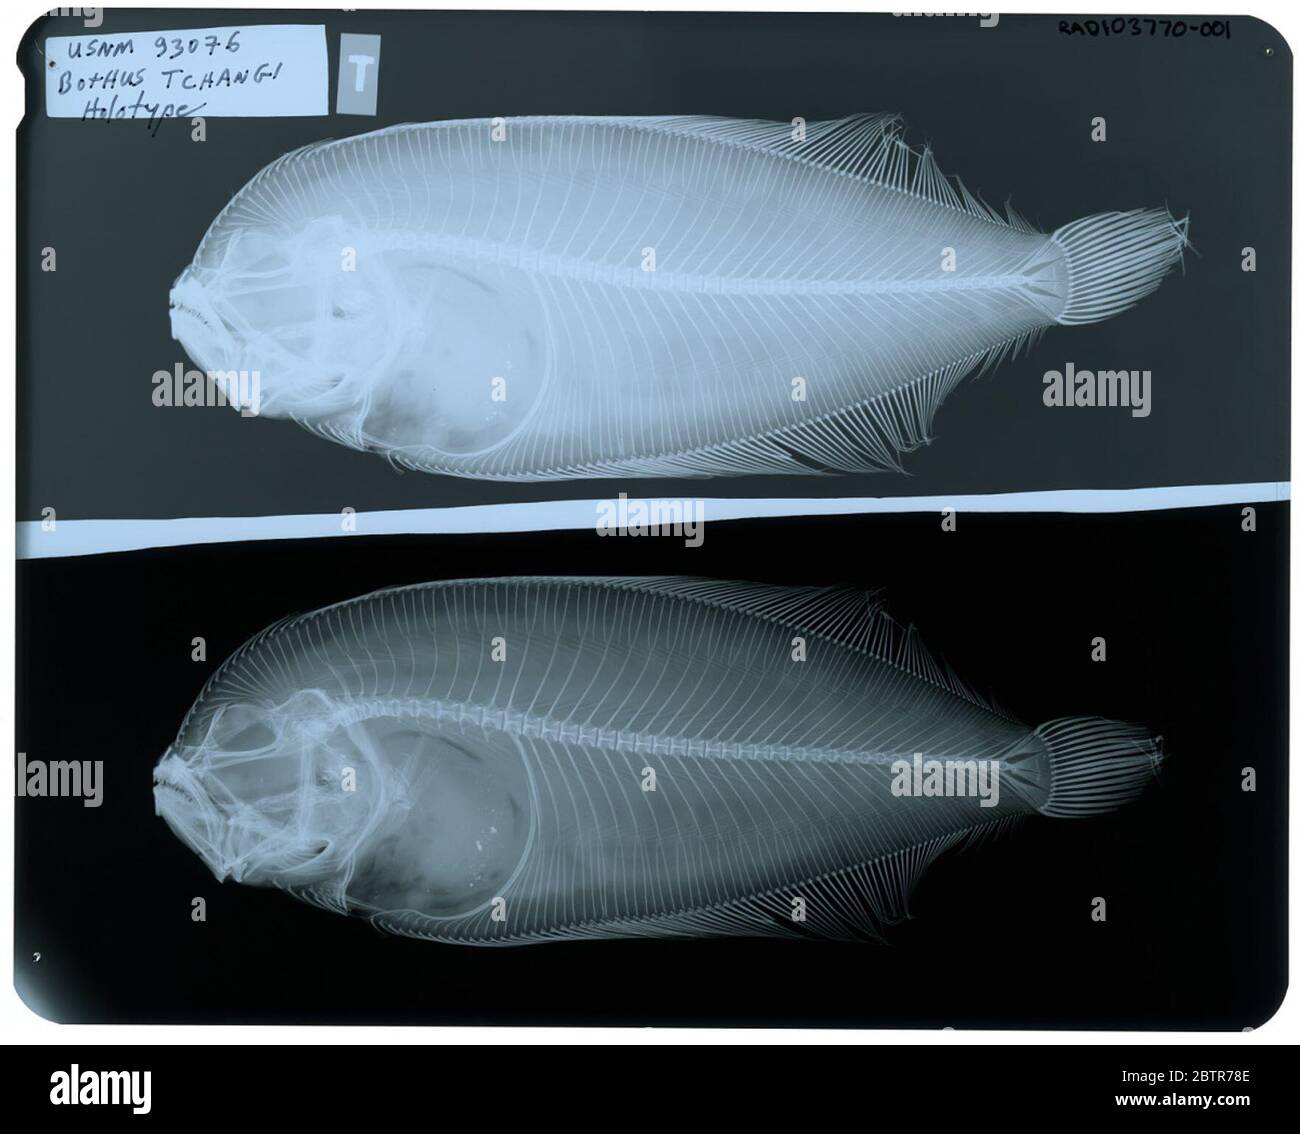 Bothus tchangi. Radiograph is of a type; The Smithsonian NMNH Division of Fishes uses the convention of maintaining the original species name for type specimens designated at the time of description. The currently accepted name for this species is Arnoglossus polyspilus.29 Oct 2018D. 54751 Stock Photo